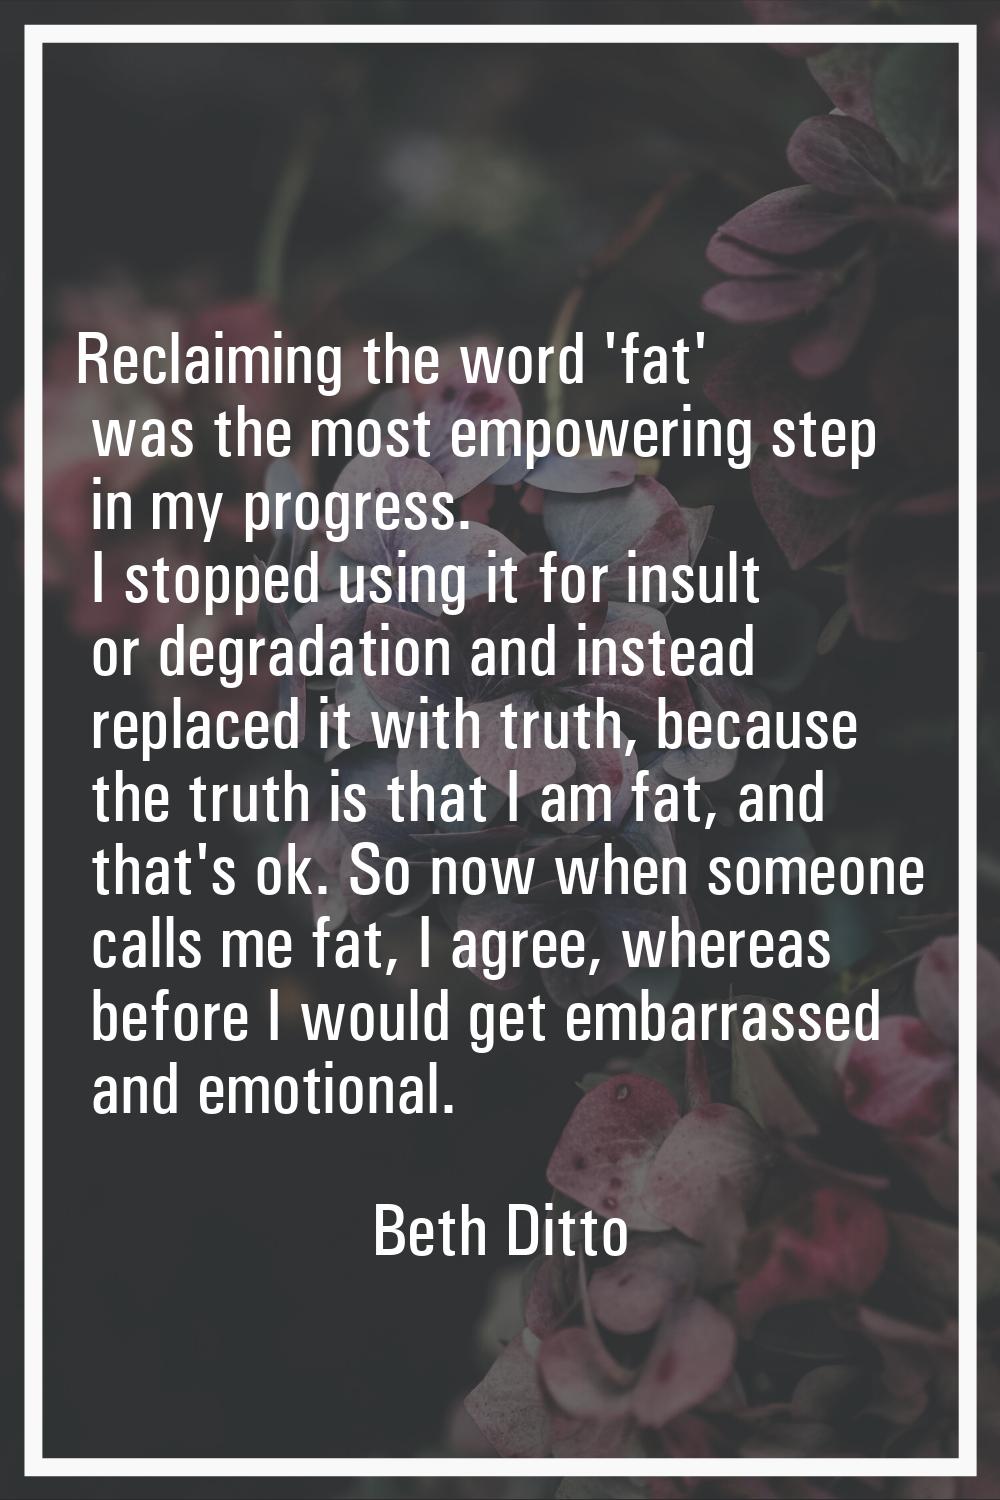 Reclaiming the word 'fat' was the most empowering step in my progress. I stopped using it for insul